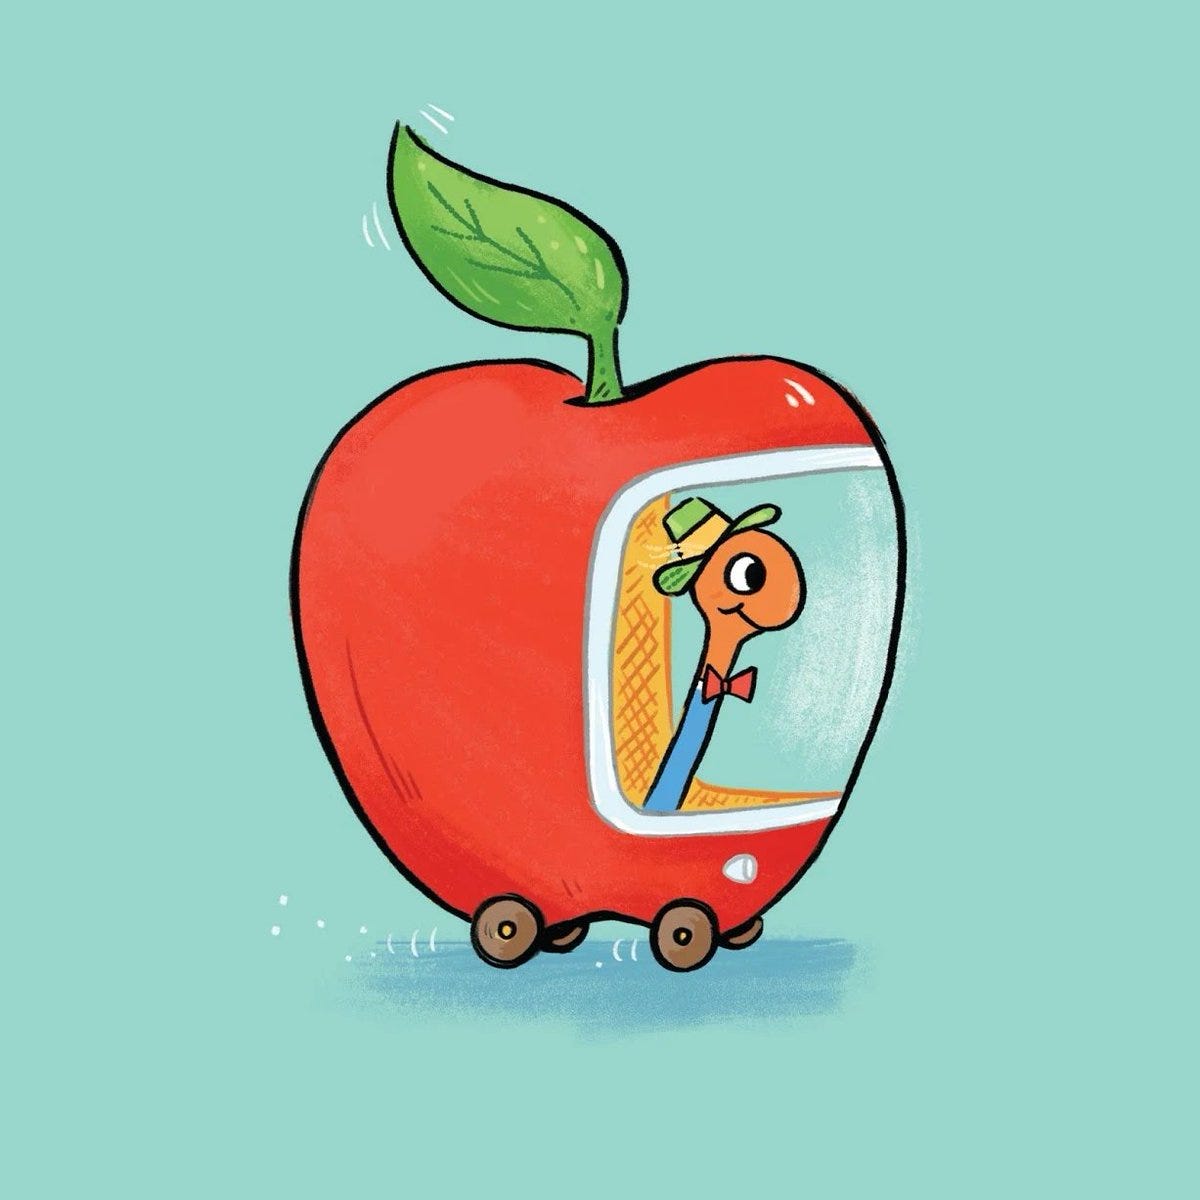 Laura J. Nelson 🦅 on Twitter: "@robertwoolley @2AvSagas @TfL But how do we  feel about the Lowly Worm apple car? https://t.co/20Bd6UPLzw" / Twitter